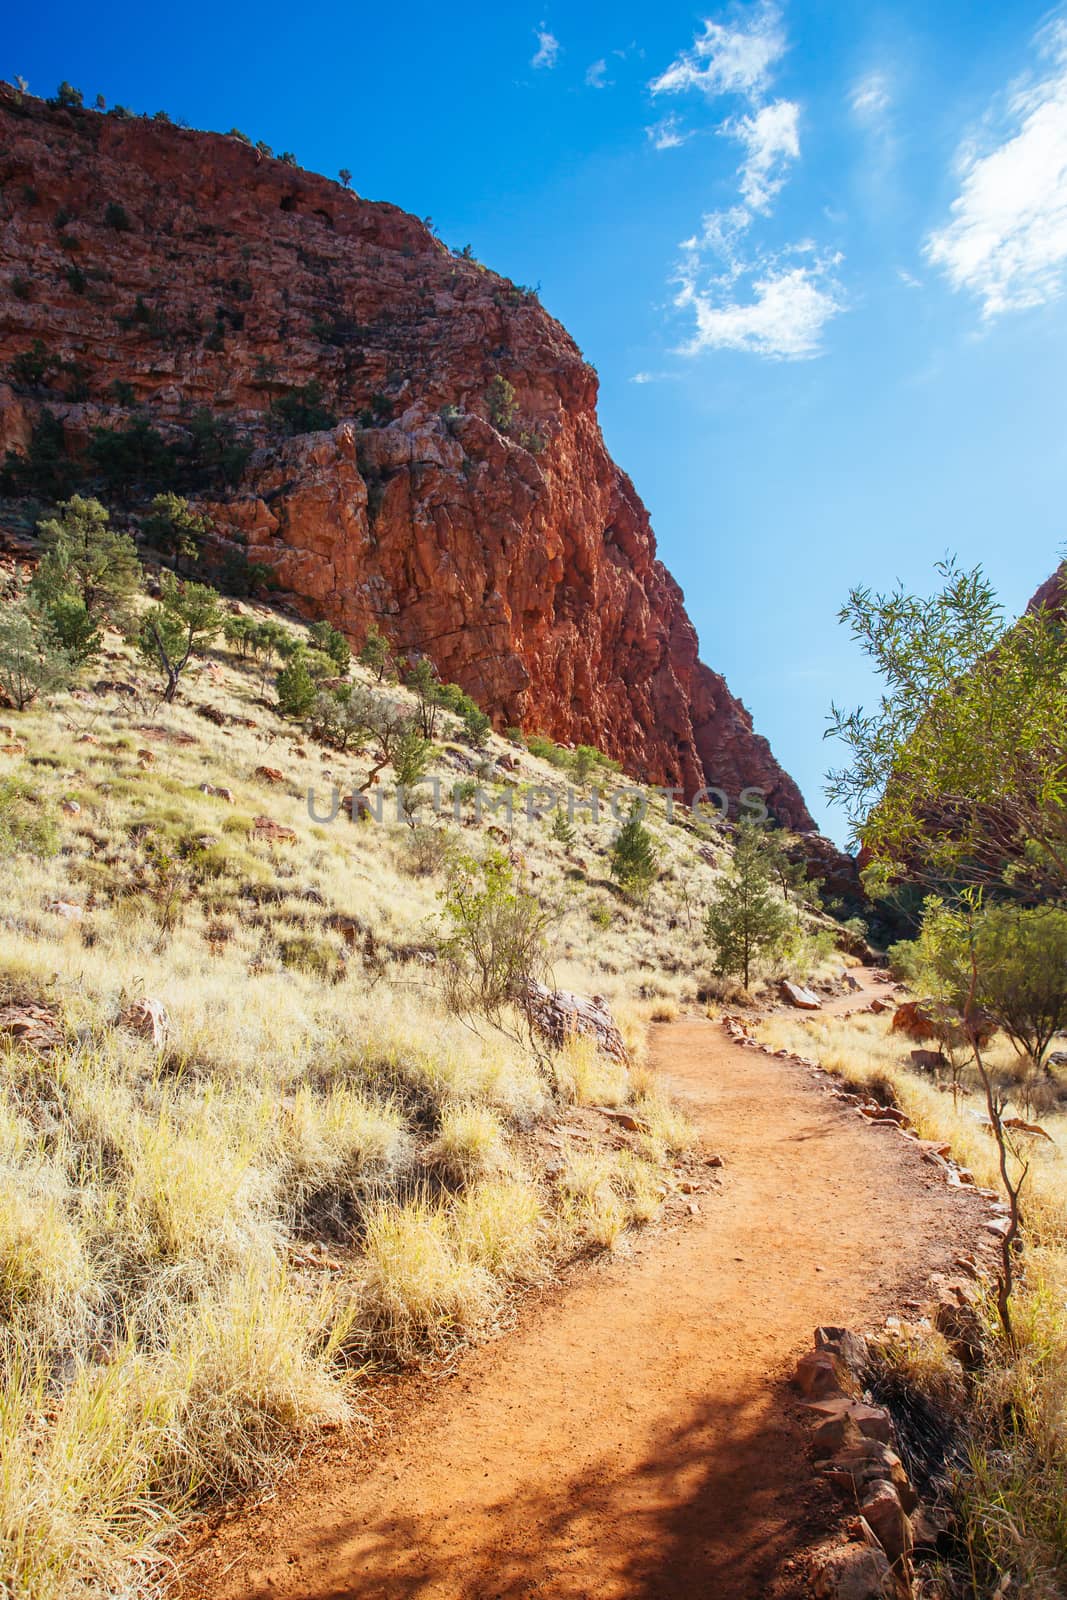 The iconic Simpsons Gap and its fascinating rock formations in MacDonnell Ranges National Park, near Alice Springs in the Northern Territory, Australia